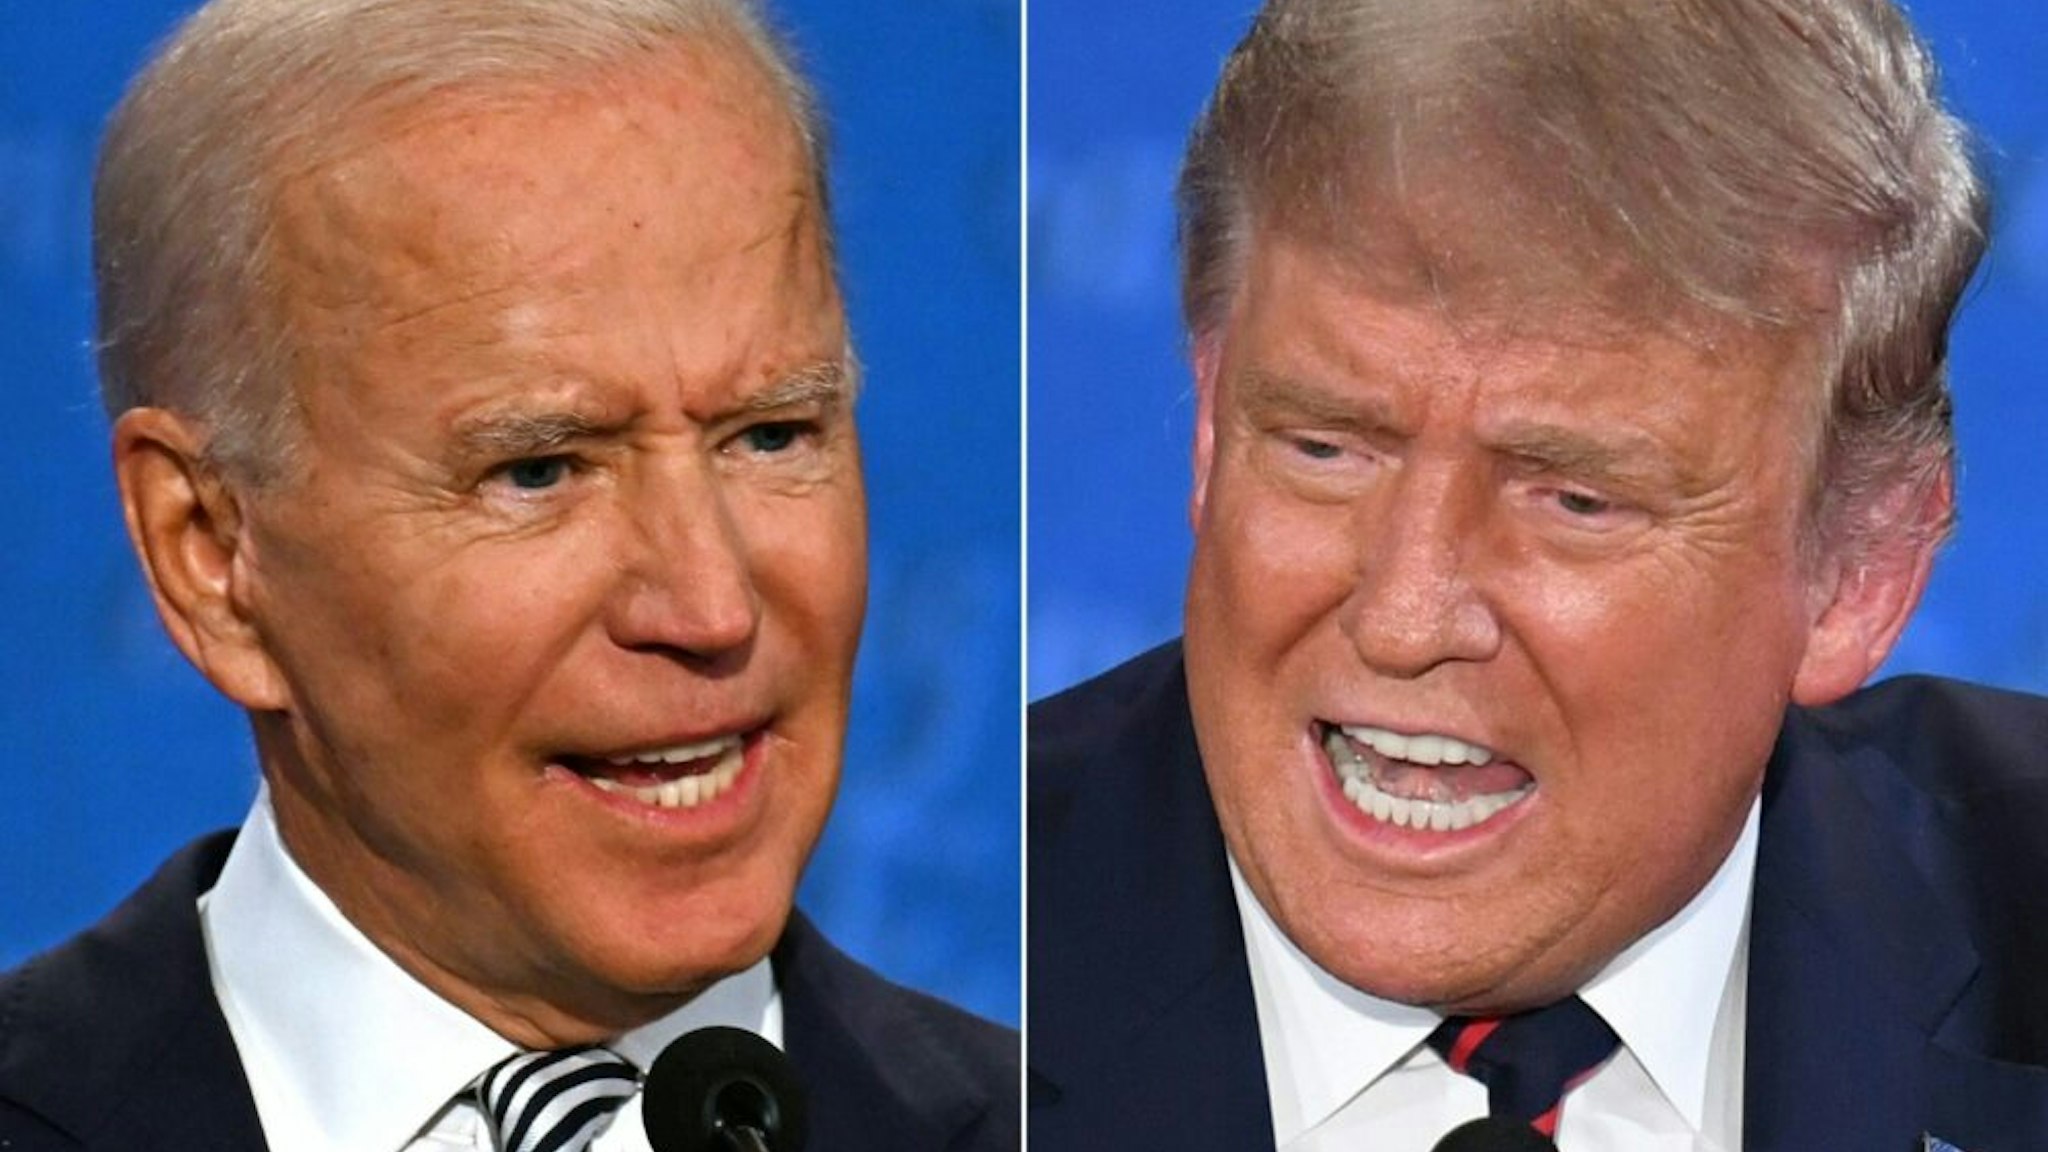 TOPSHOT - (COMBO) This combination of pictures created on September 29, 2020 shows Democratic Presidential candidate and former US Vice President Joe Biden (L) and US President Donald Trump speaking during the first presidential debate at the Case Western Reserve University and Cleveland Clinic in Cleveland, Ohio on September 29, 2020. (Photos by JIM WATSON and SAUL LOEB / AFP)